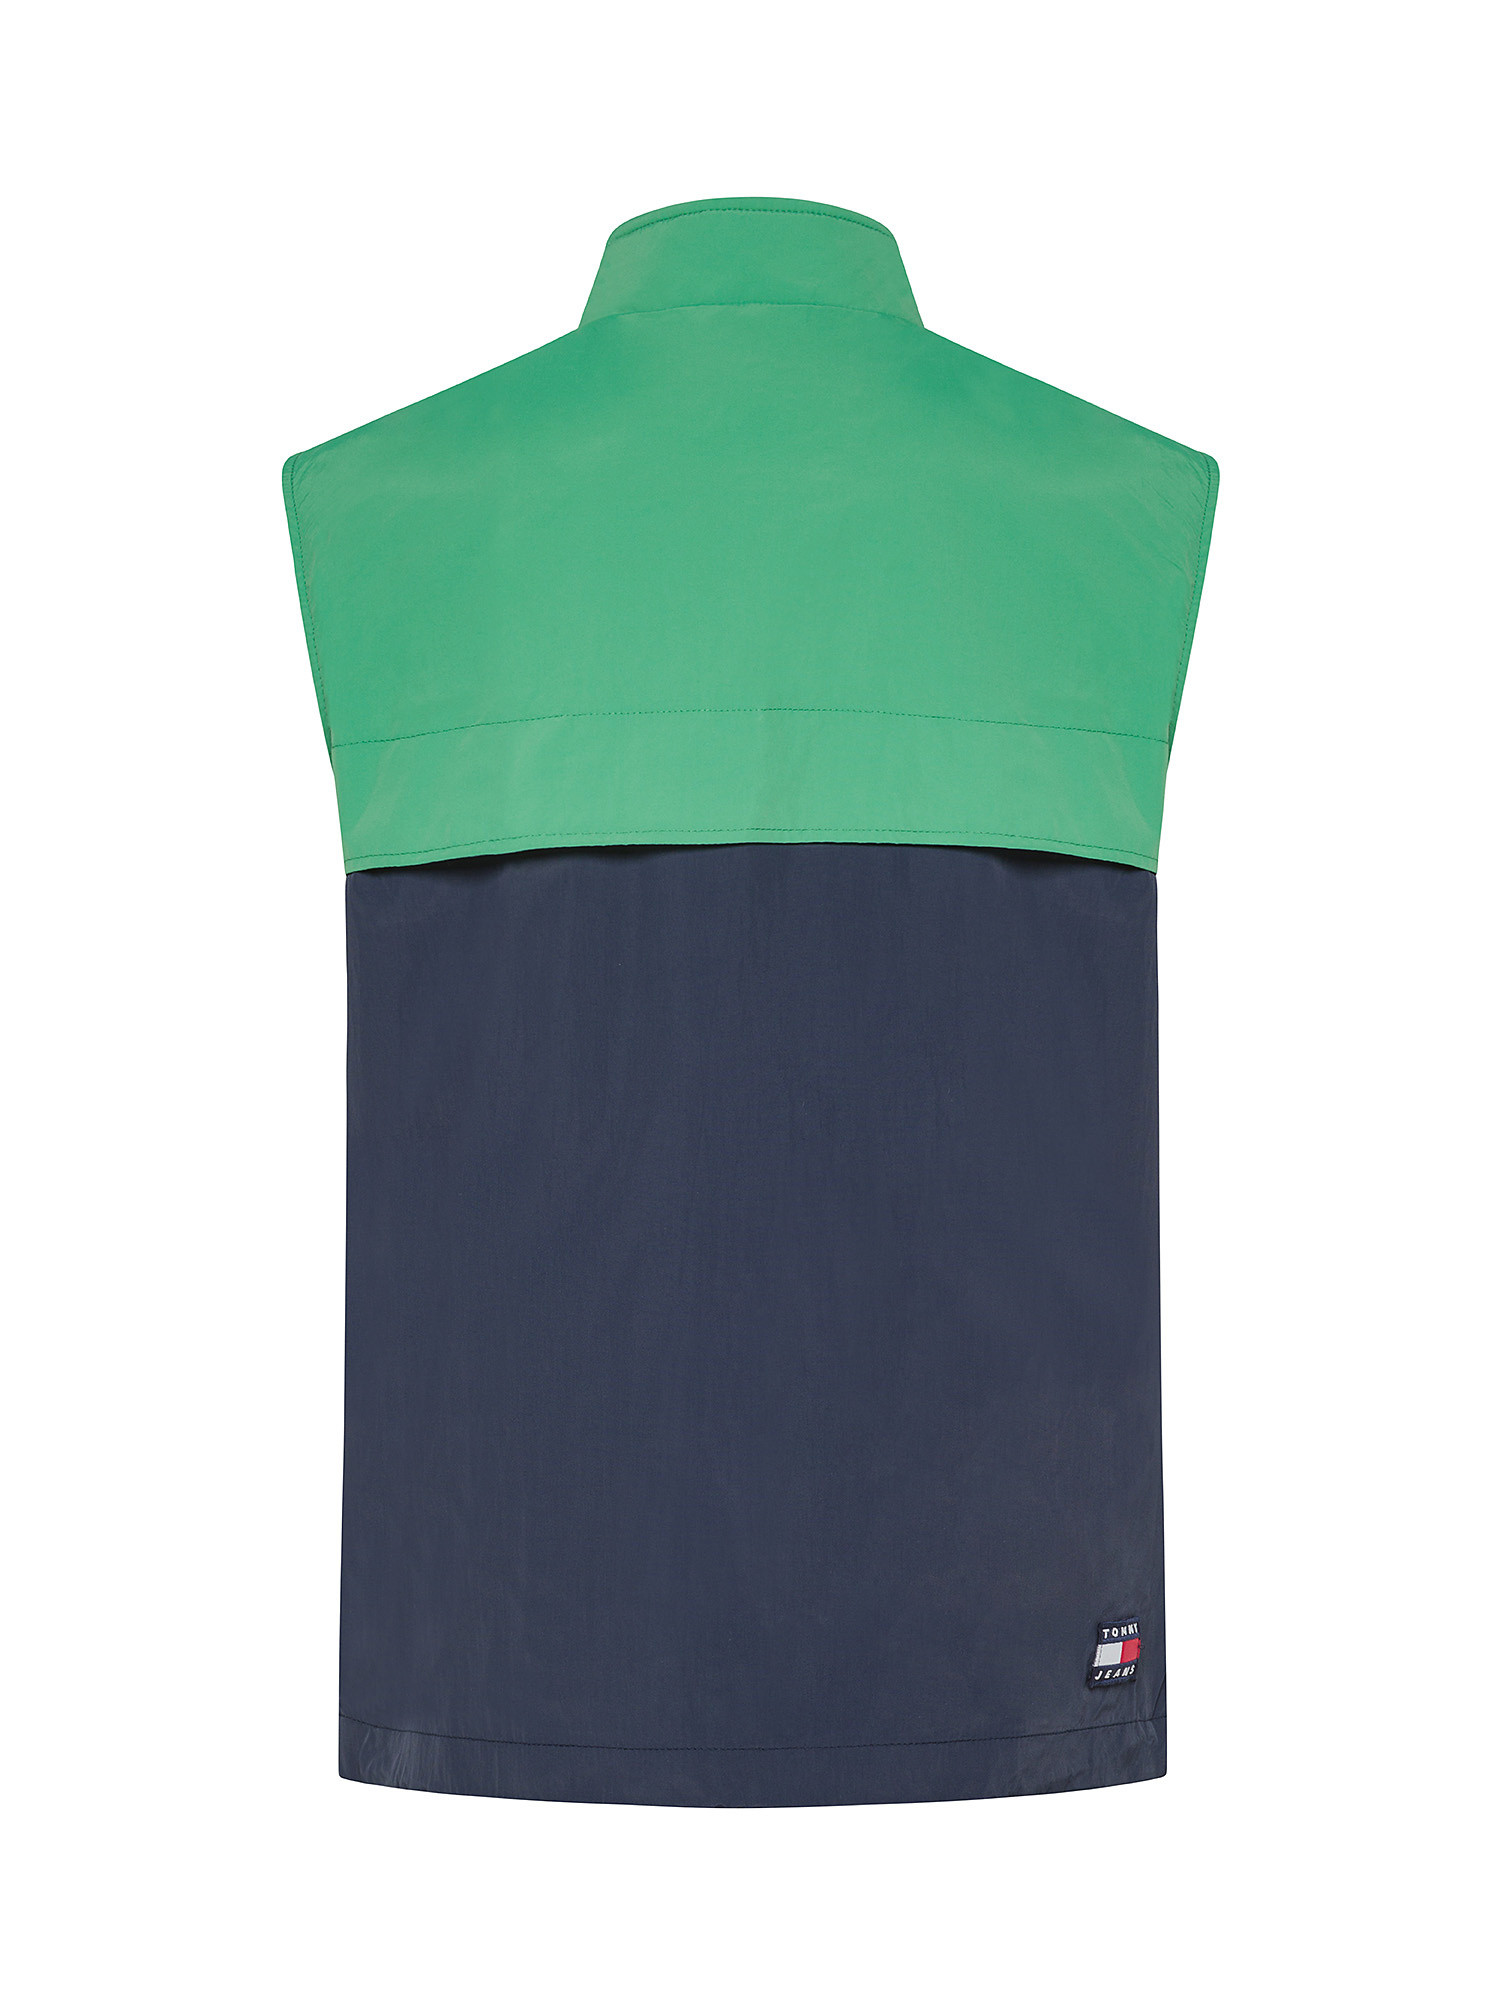 Tommy Jeans - Giacca smanicata color block, Blu scuro, large image number 1